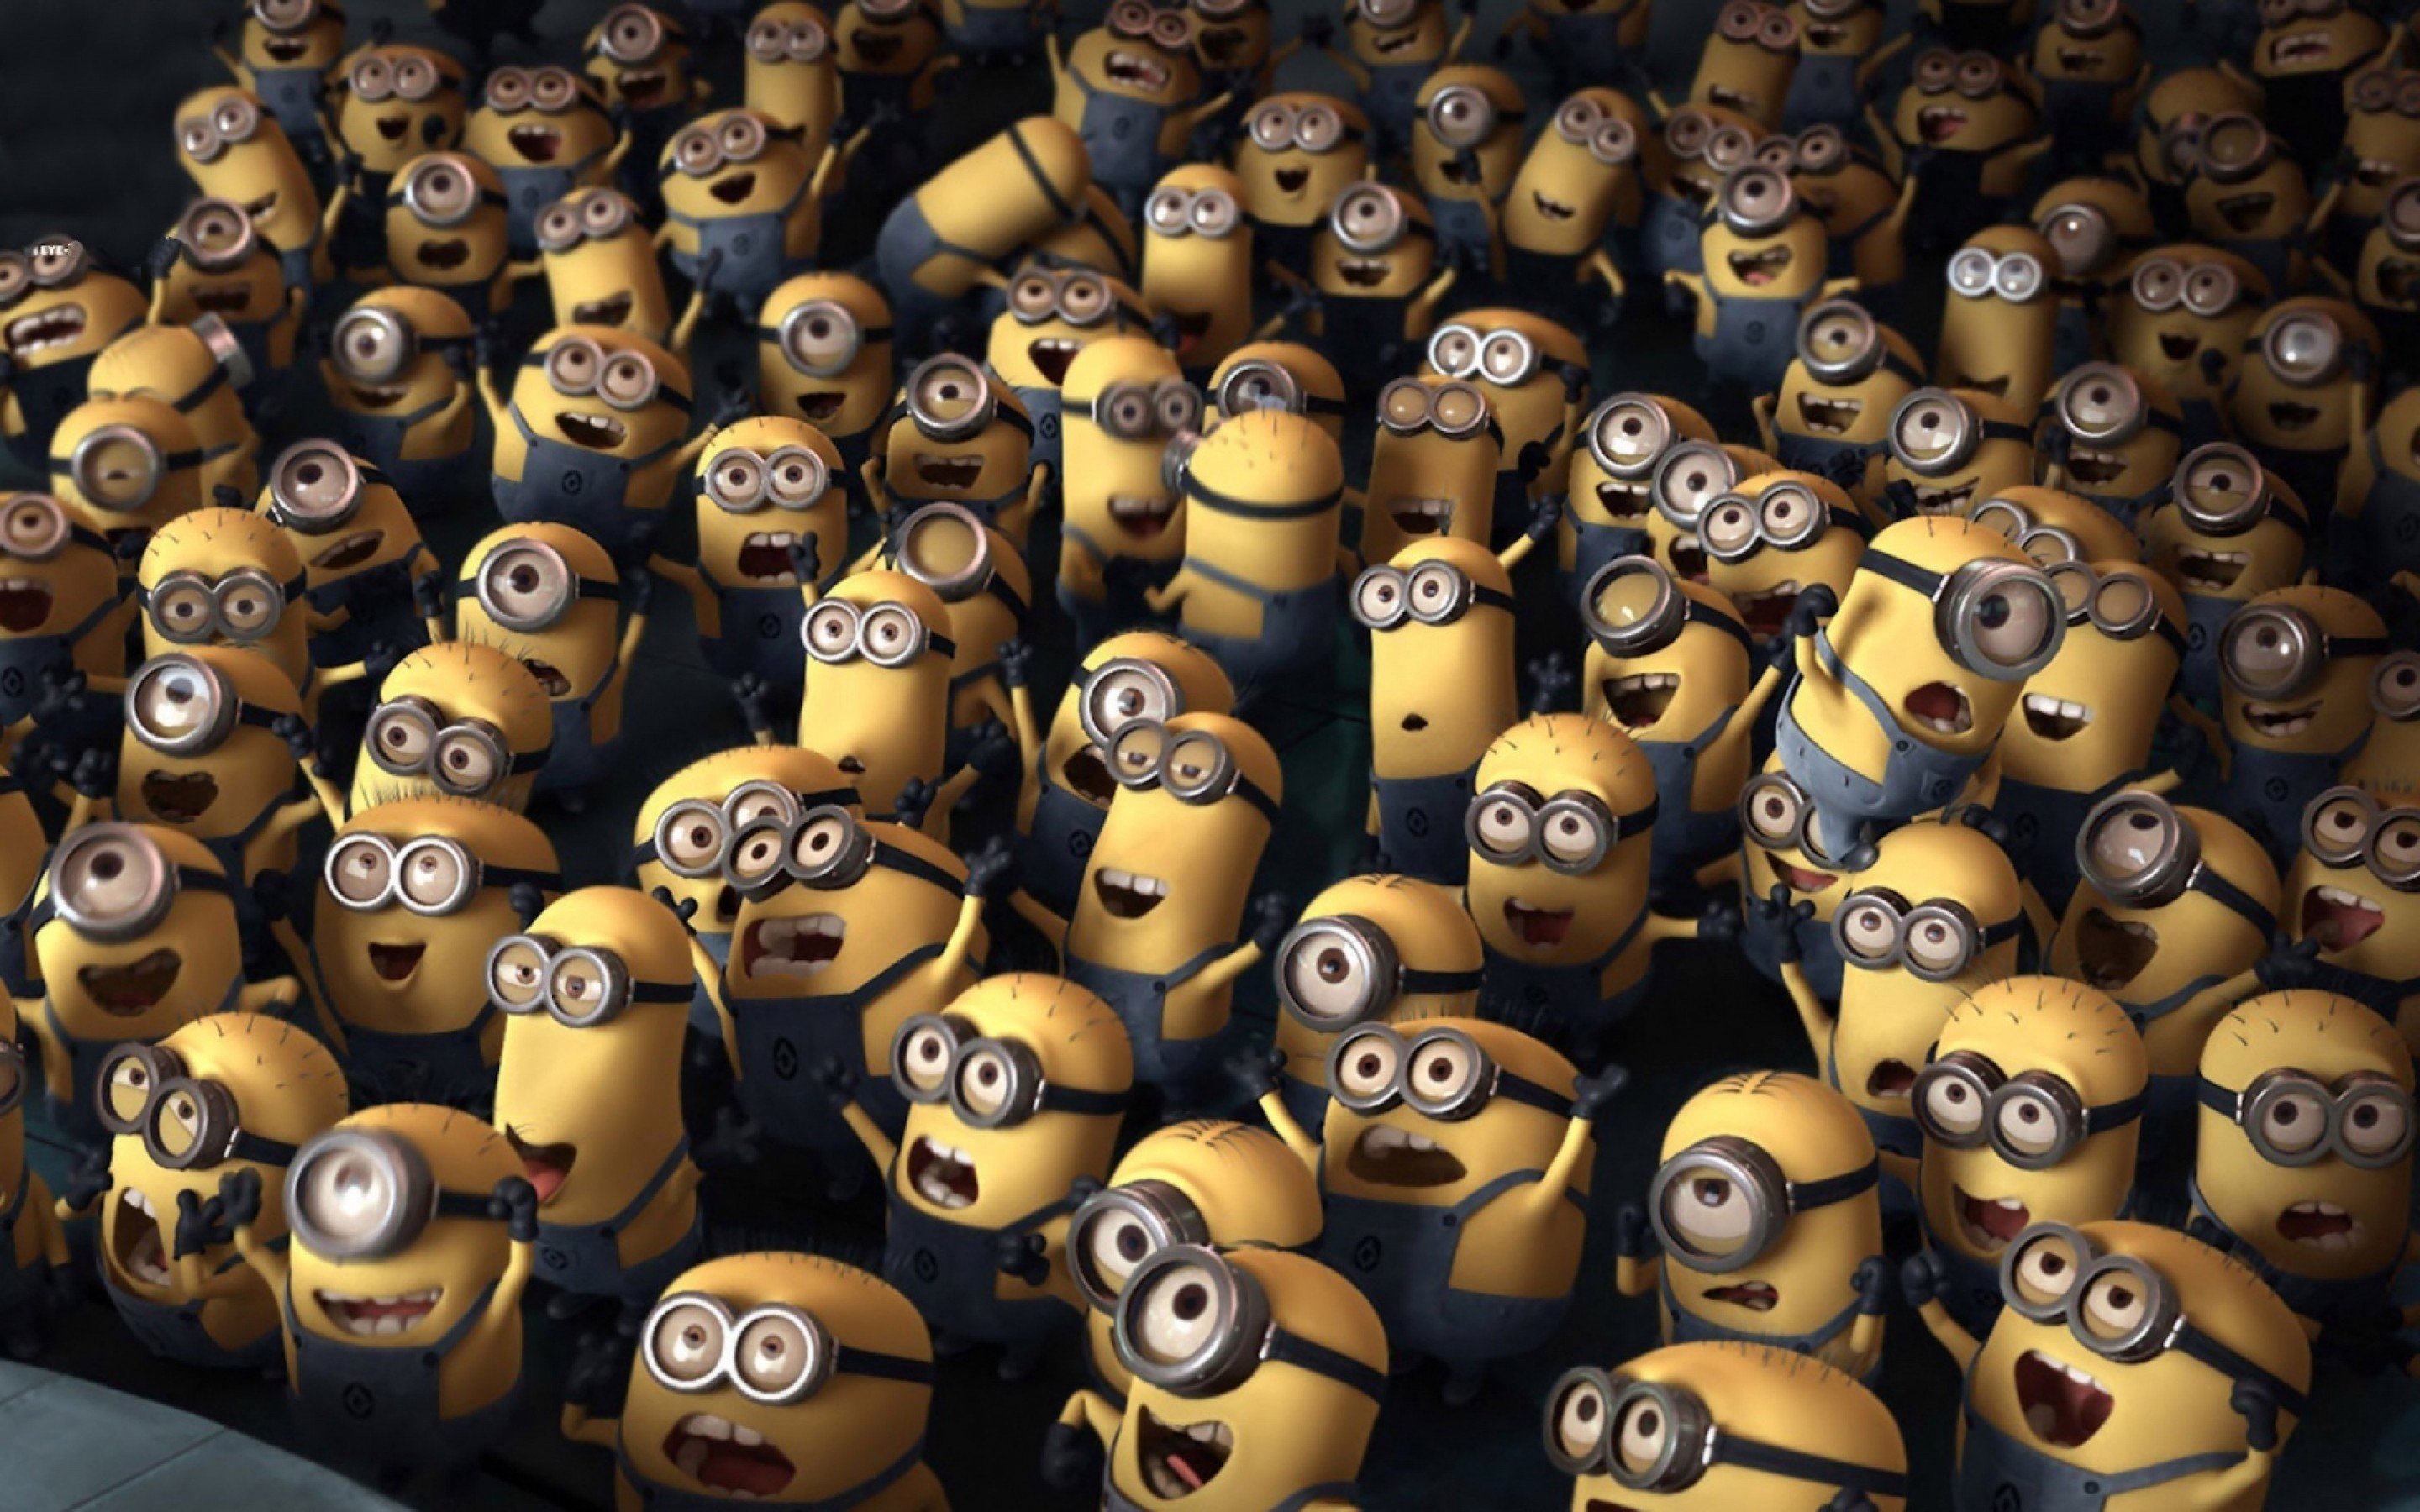 Wallpapers fear nasty me 2 despicable me 2 on the desktop